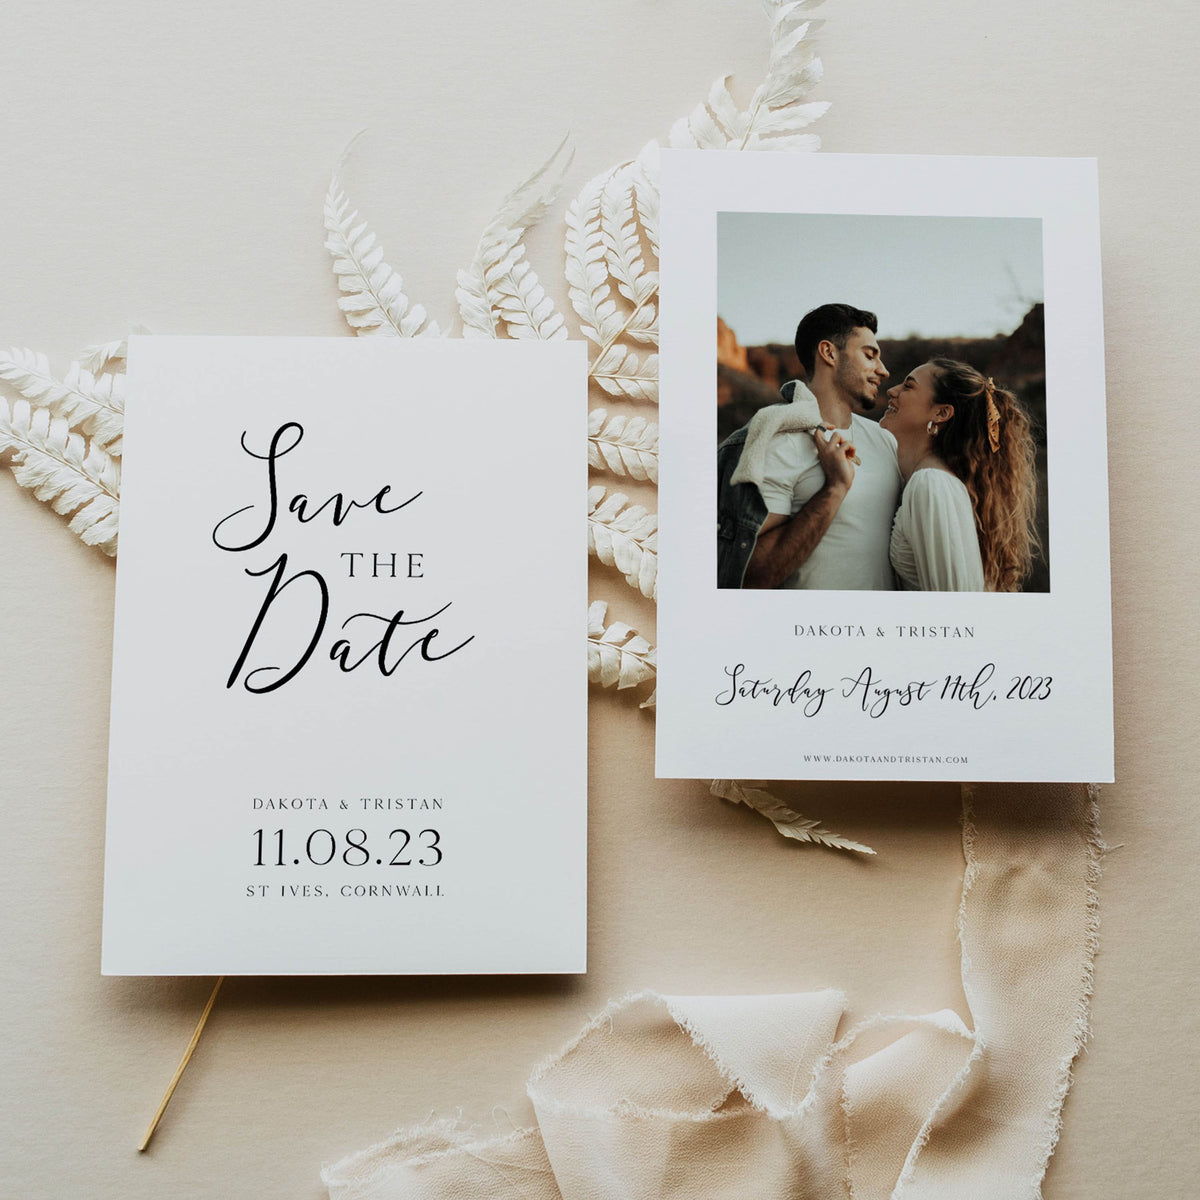 editable save the dates, save the dates, printable save the dates, CALLIGRAPHY editable wedding invitation suite, editable wedding stationery, printable wedding stationery, modern wedding items, wedding save the dates